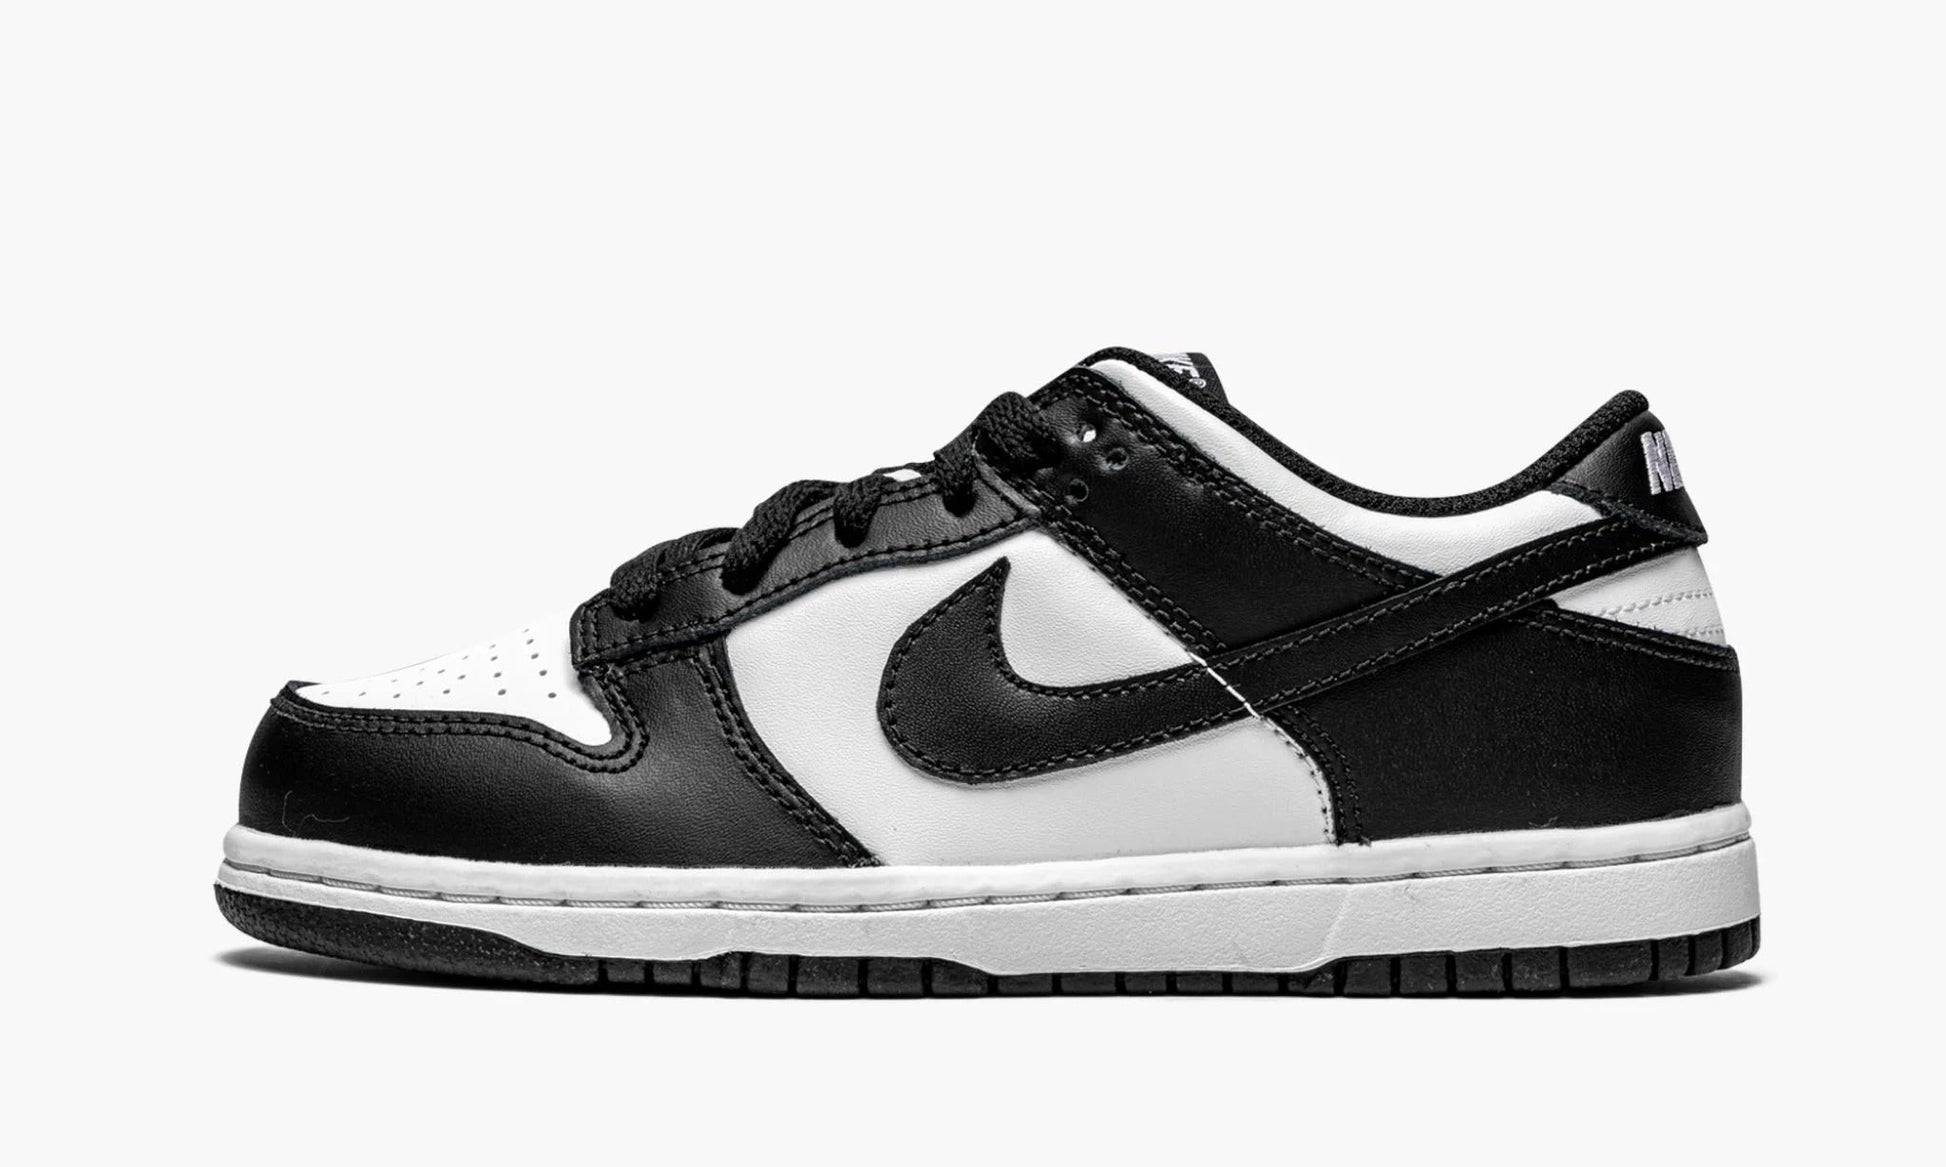 Dunk Low PS Black White - CW1588 100 | The Sortage